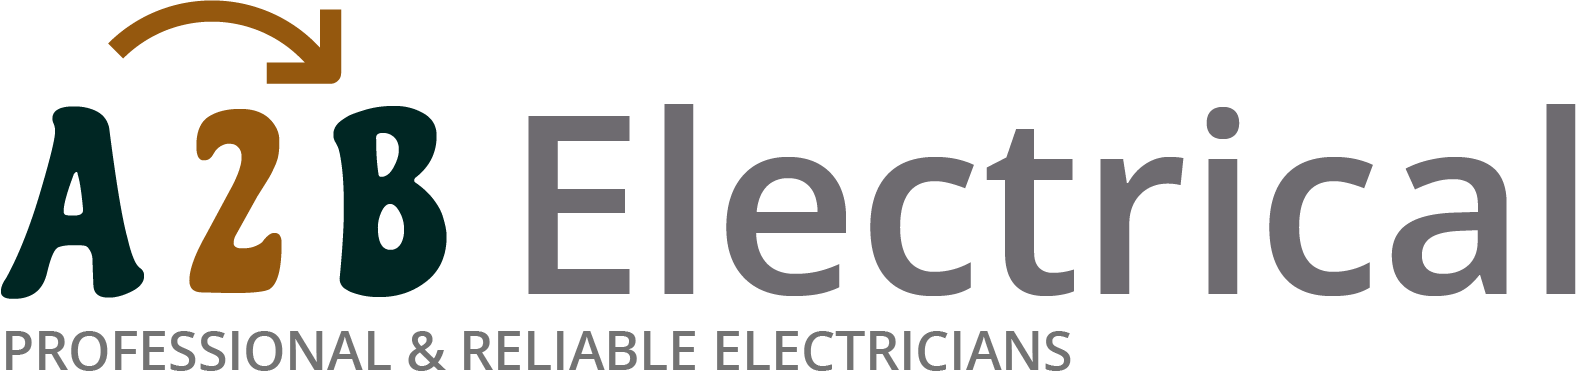 If you have electrical wiring problems in Lofthouse, we can provide an electrician to have a look for you. 